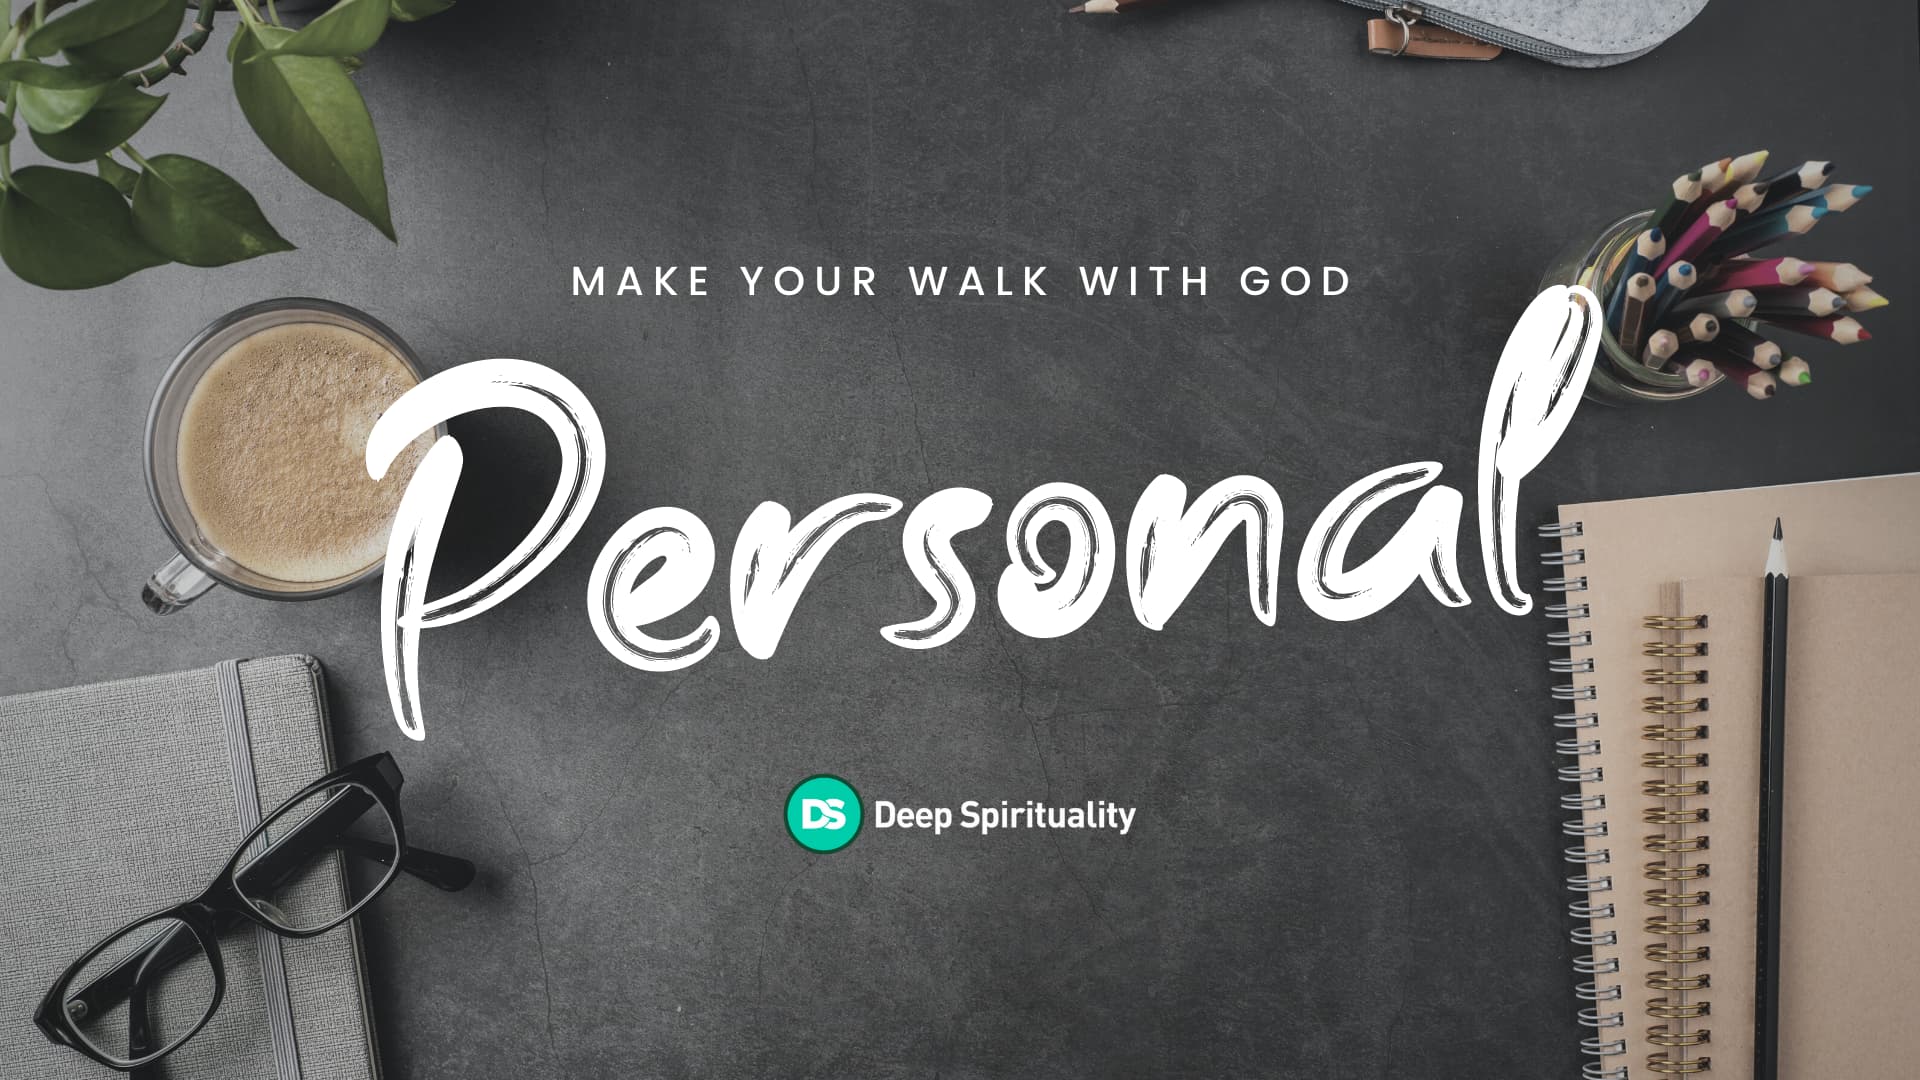 Make your walk with God personal